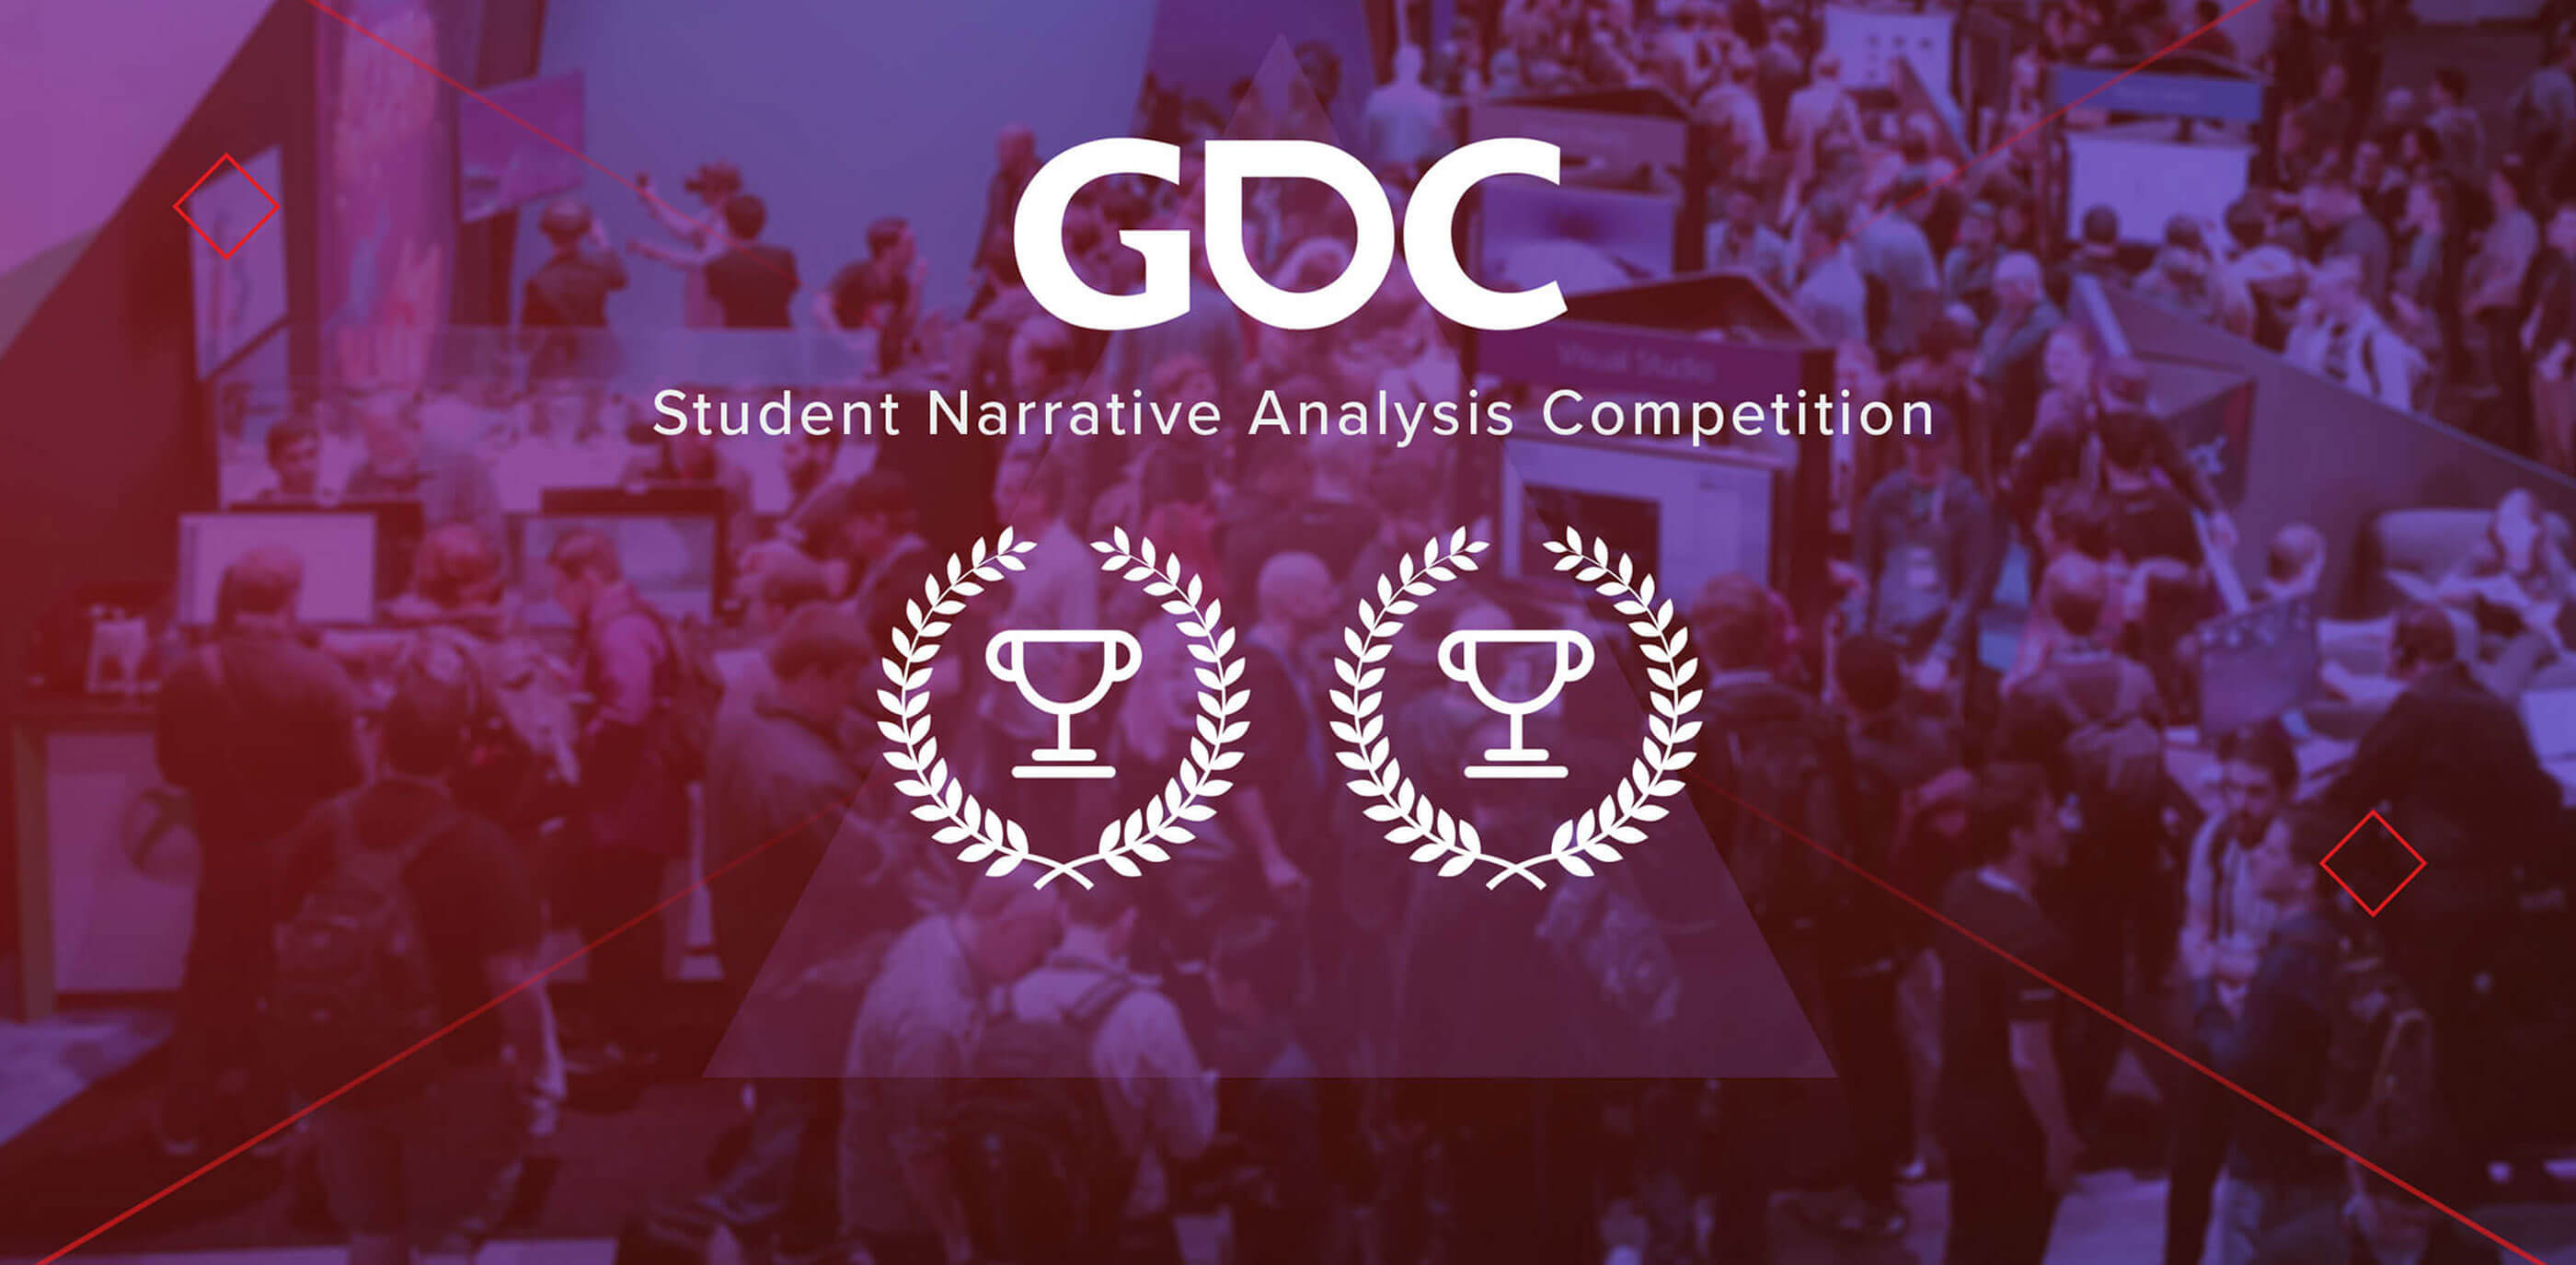 Two award graphics imposed on a purple background with the GDC logo in white above it